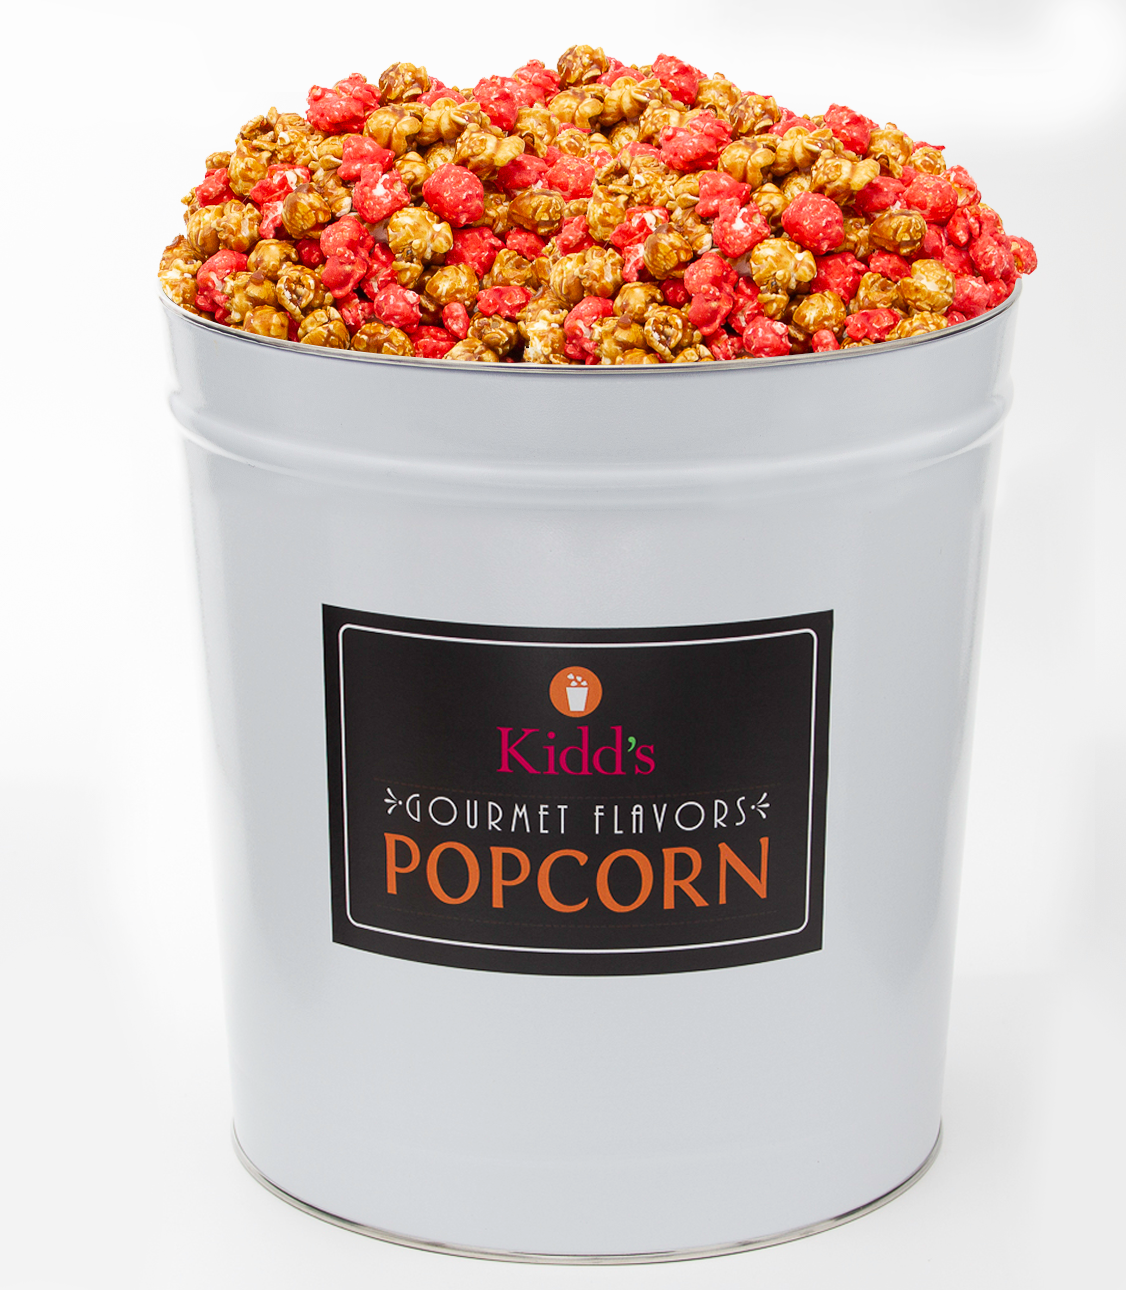 Signature White with black label Large popcorn Gift Tin. Filled with RedHots Cinnamon candy popcorn and mouthwatering caramel corn.